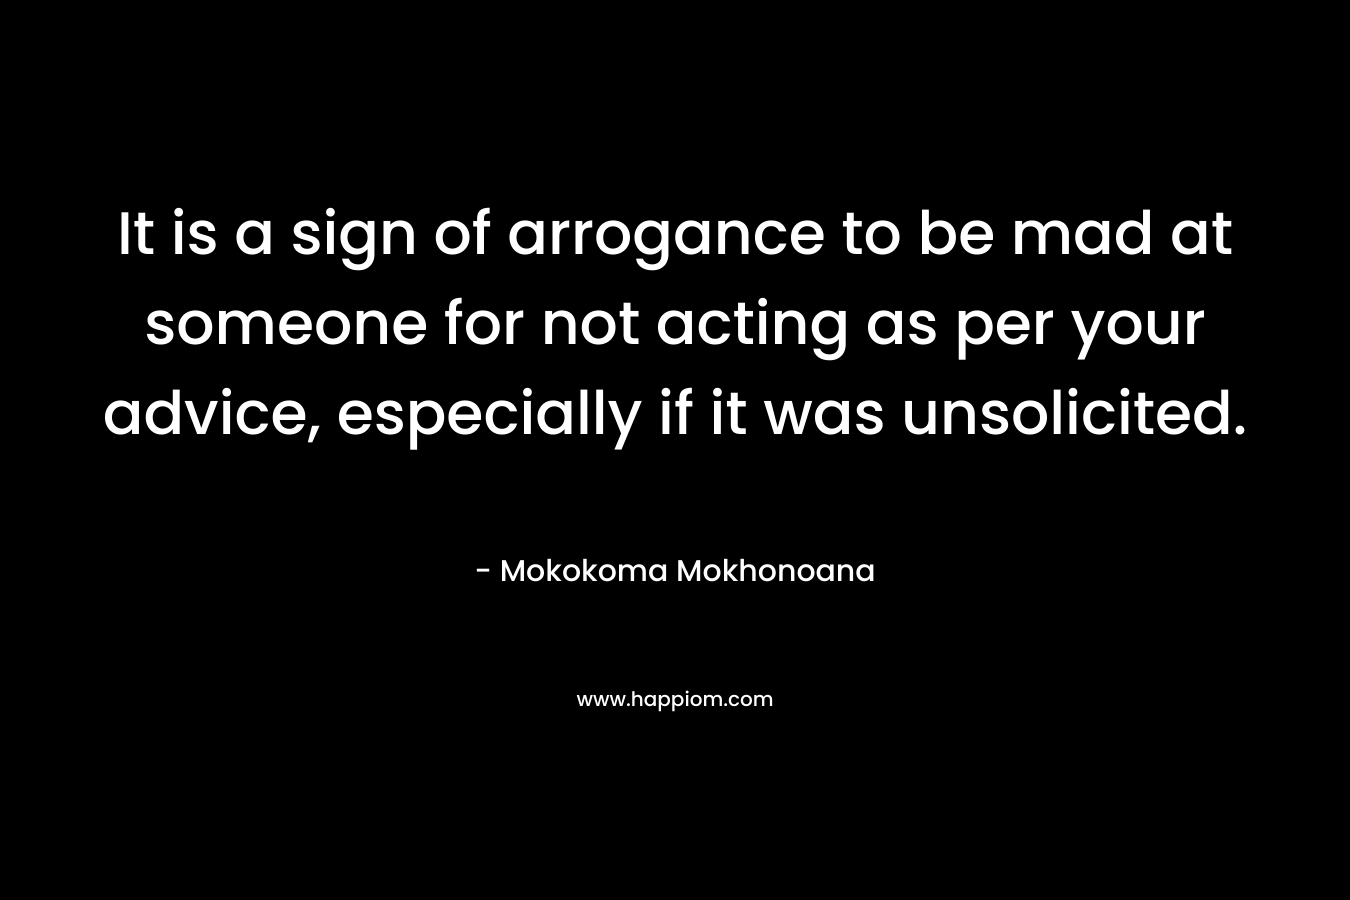 It is a sign of arrogance to be mad at someone for not acting as per your advice, especially if it was unsolicited. – Mokokoma Mokhonoana